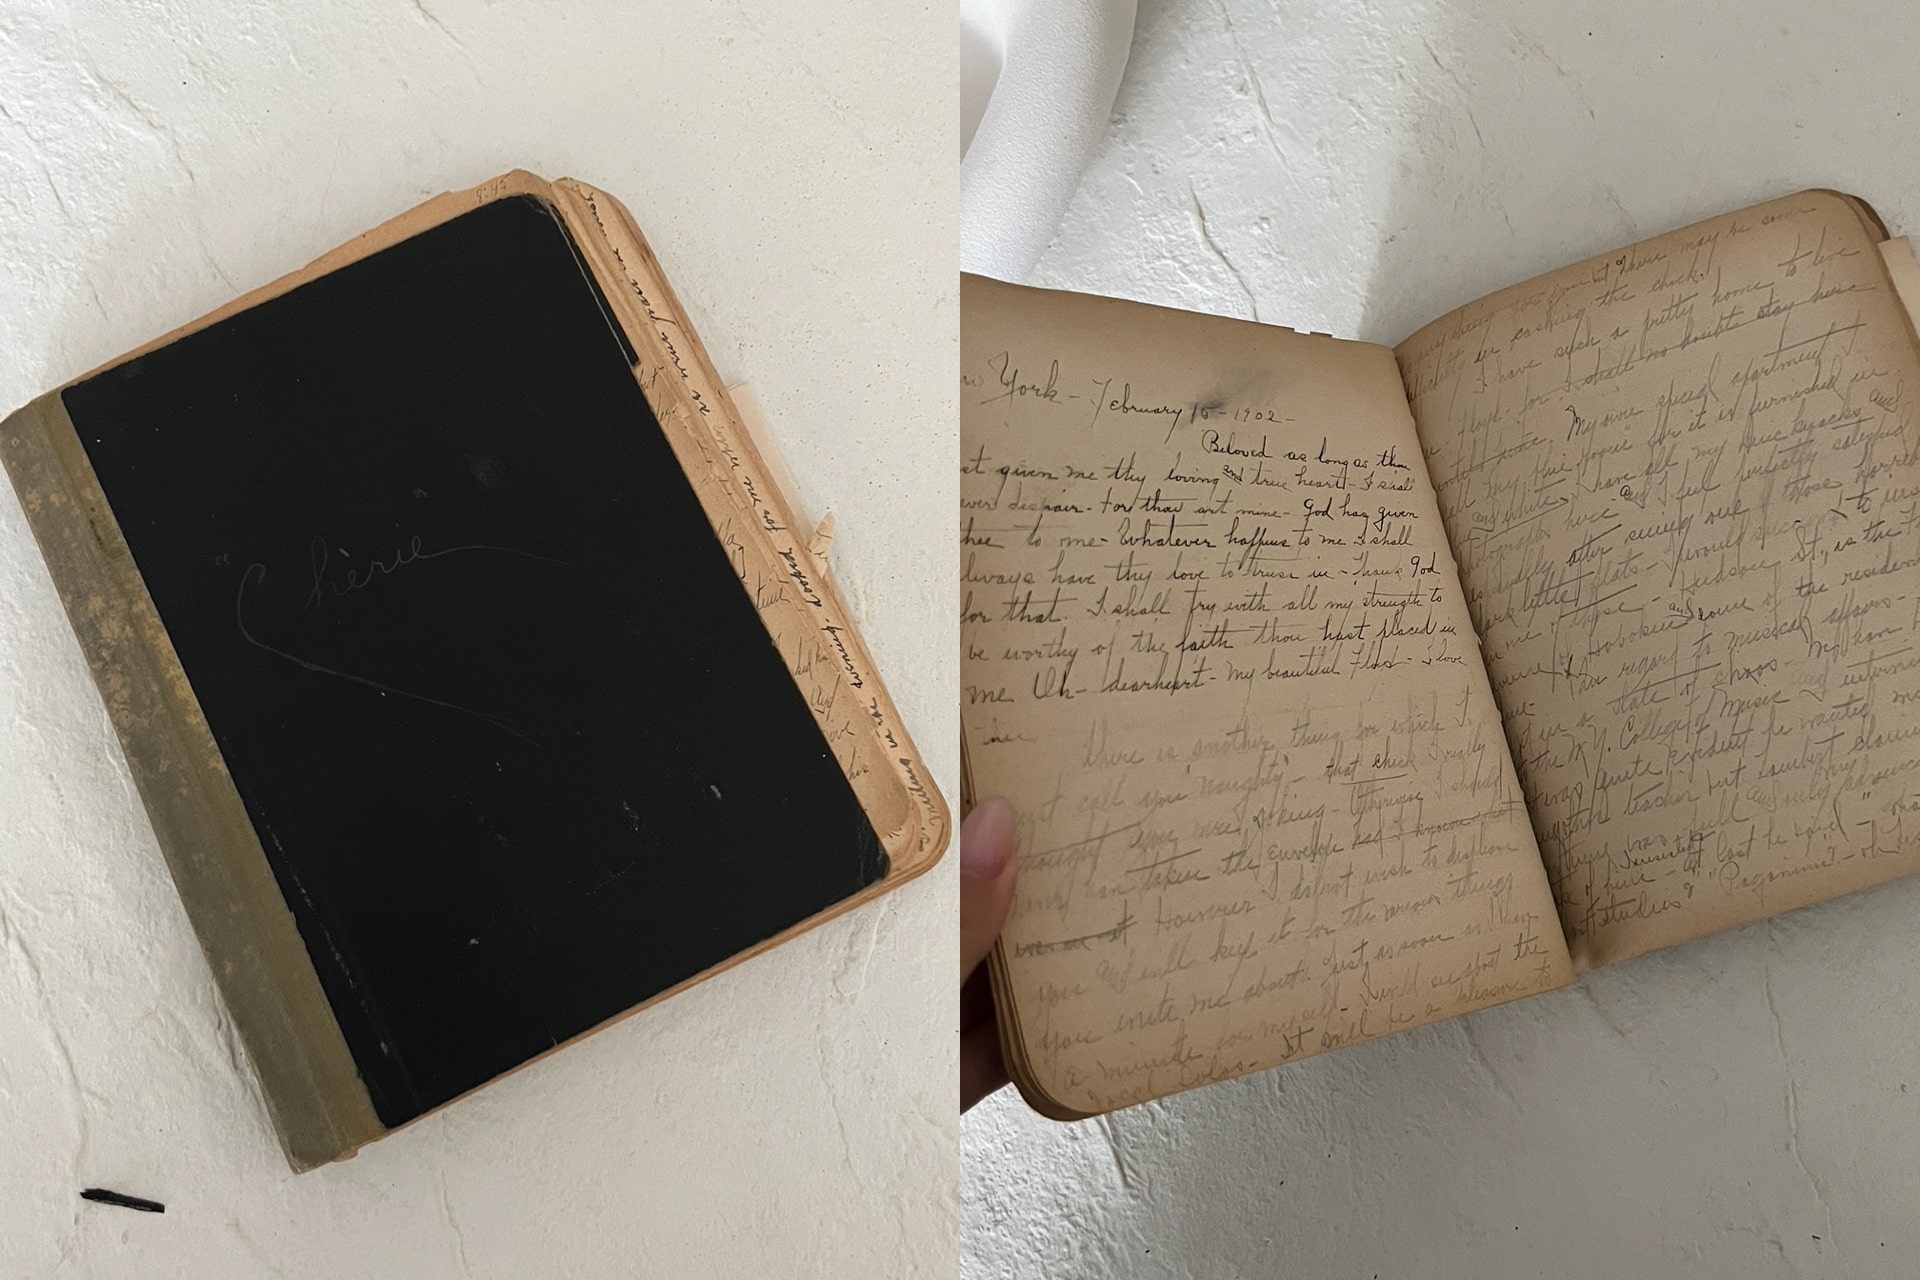 A diary from 1901